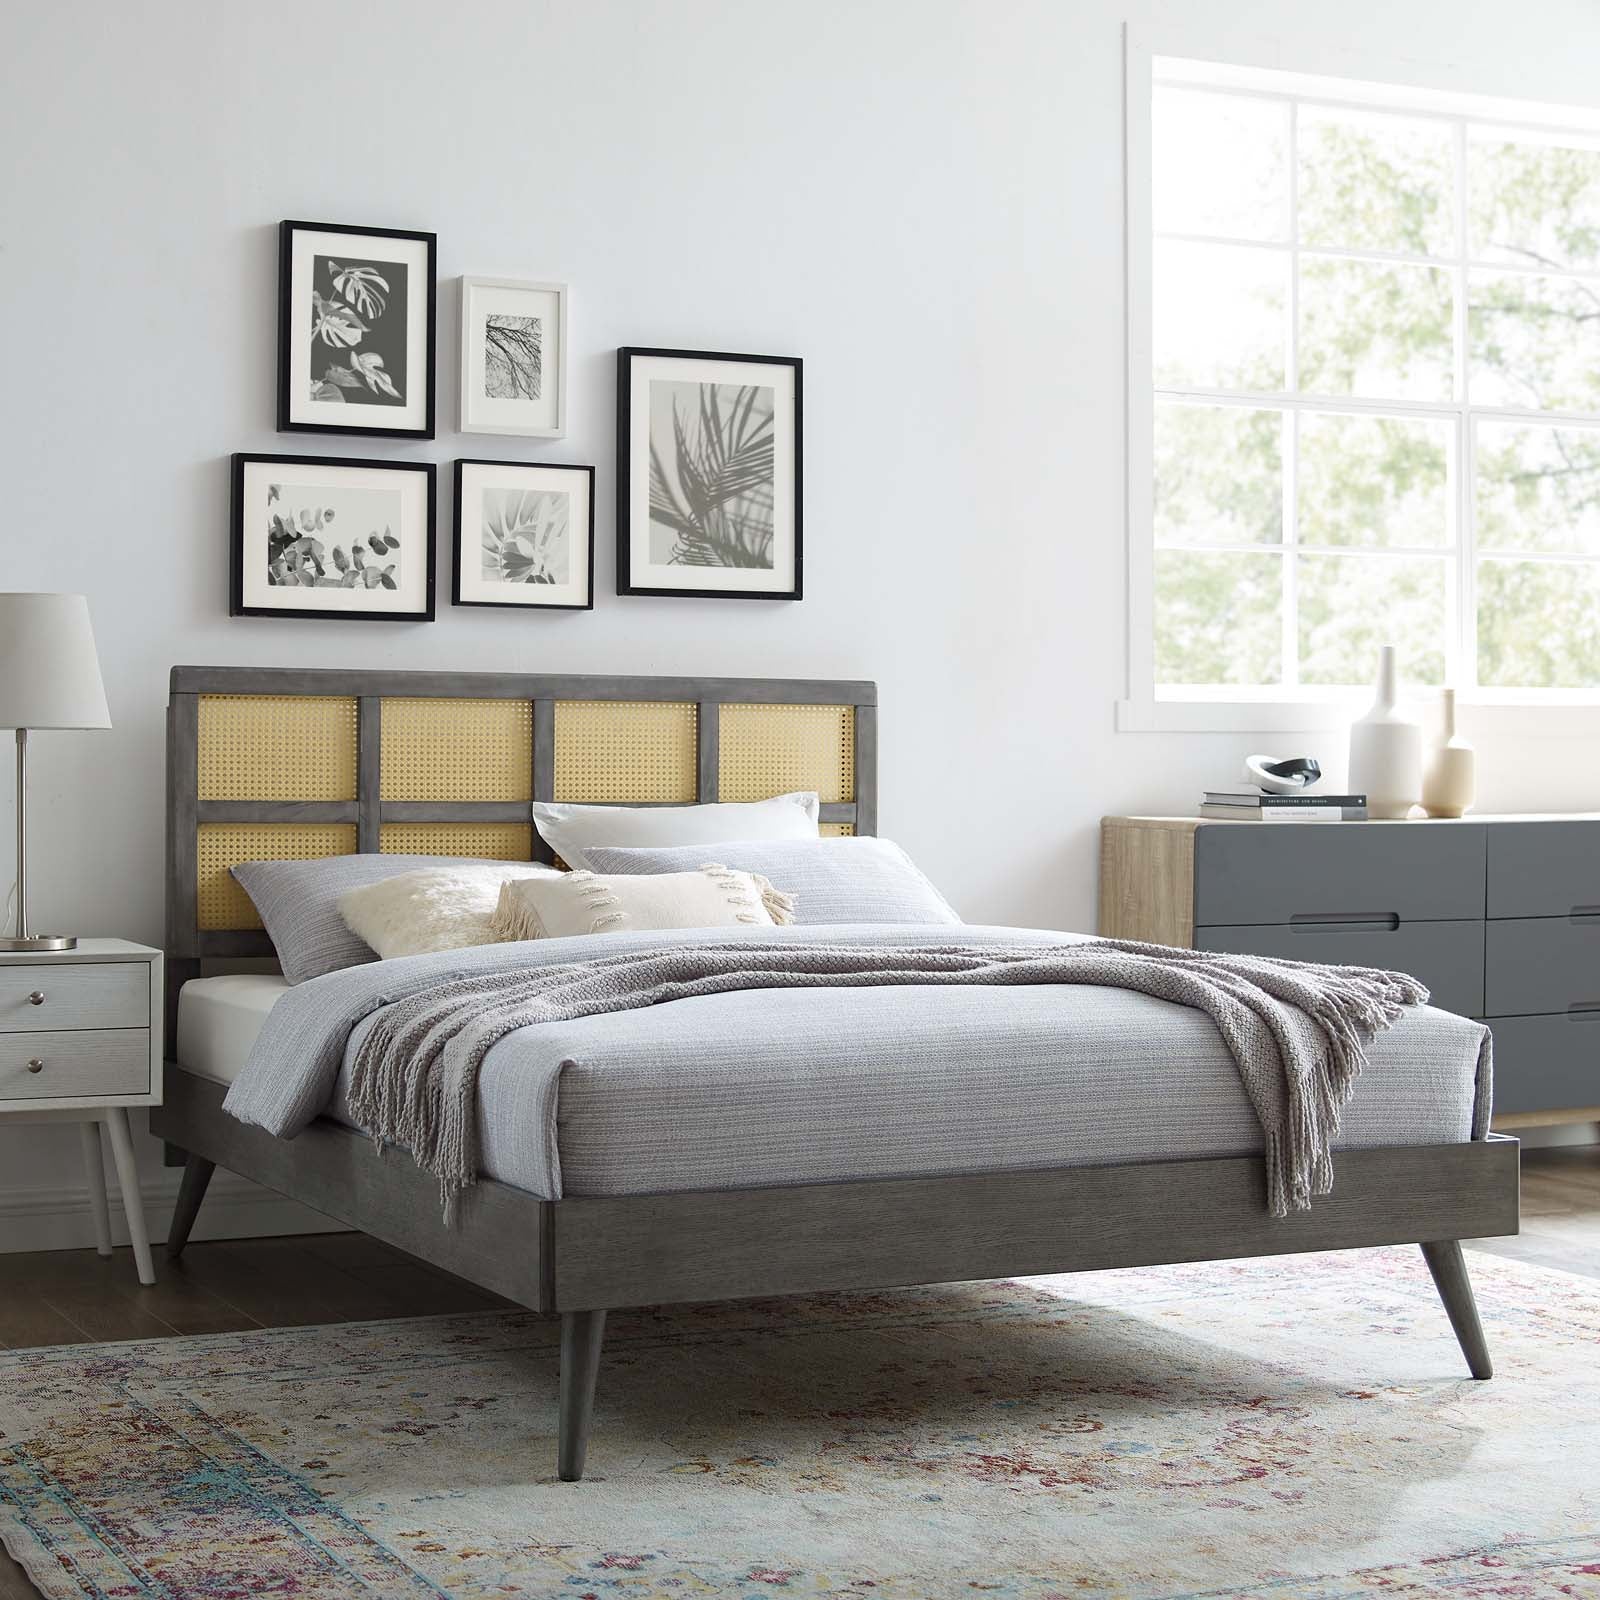 Sidney Cane and Wood King Platform Bed With Splayed Legs - East Shore Modern Home Furnishings